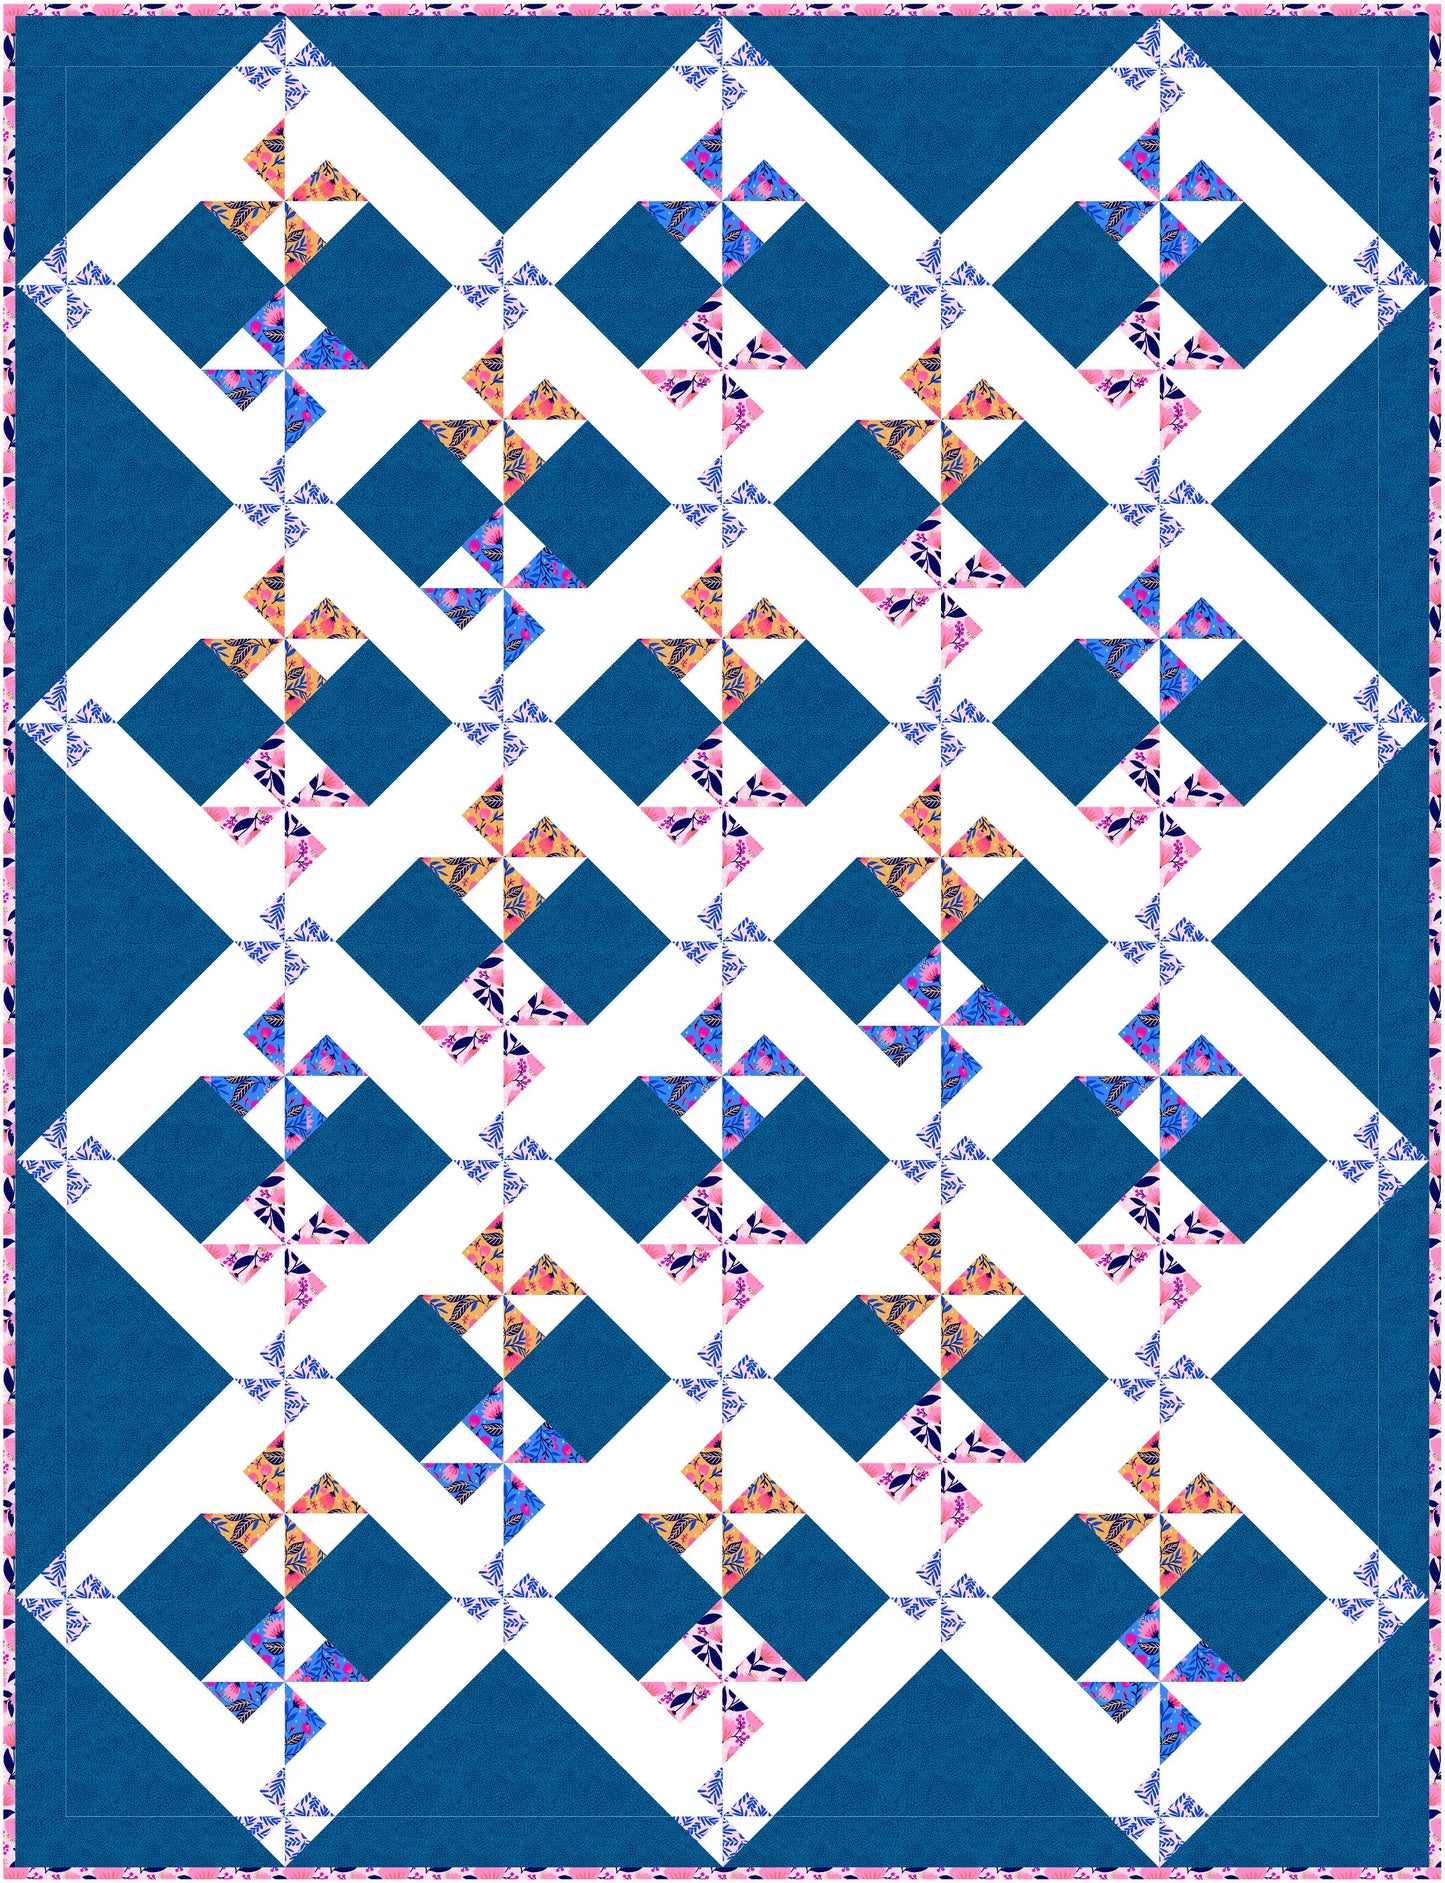 Quilt Pattern - Windy Day By Center Street Quilts